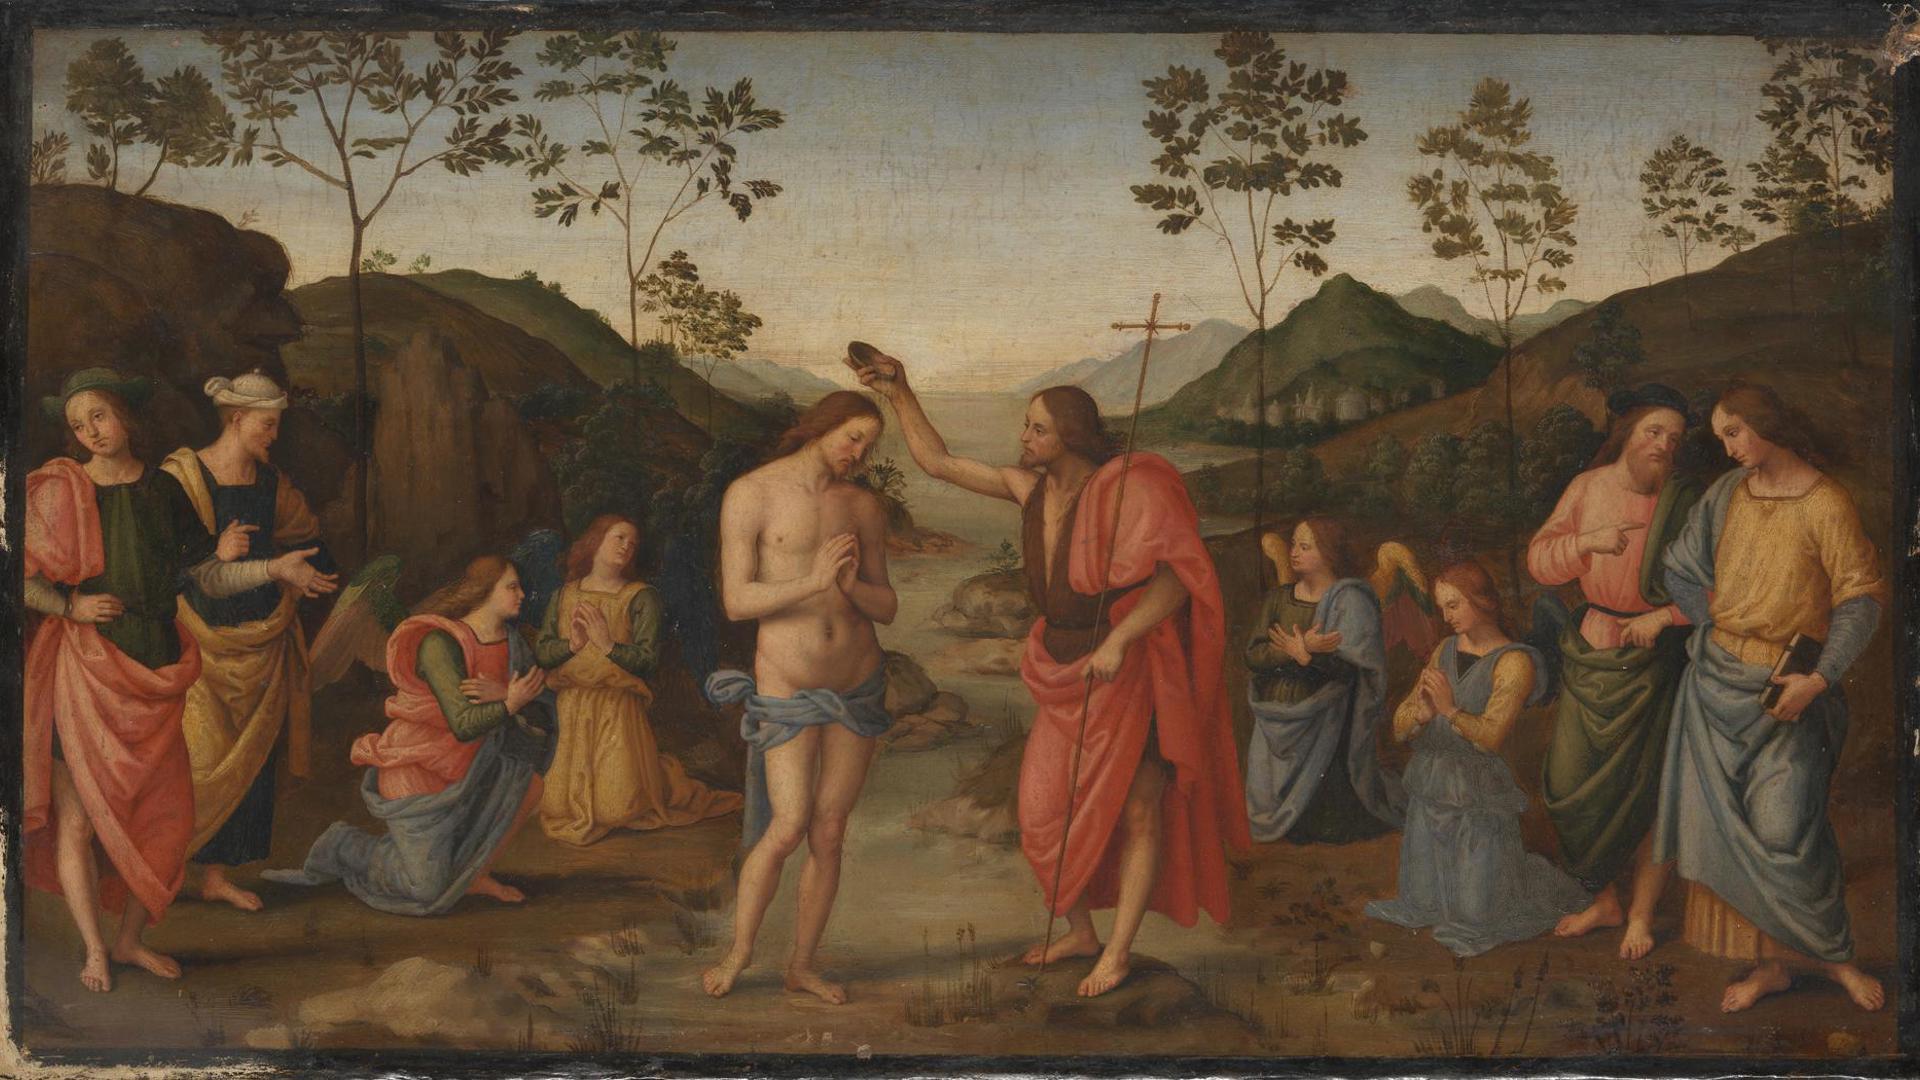 The Baptism of Christ by Probably by Sassoferrato (after Pietro Perugino)